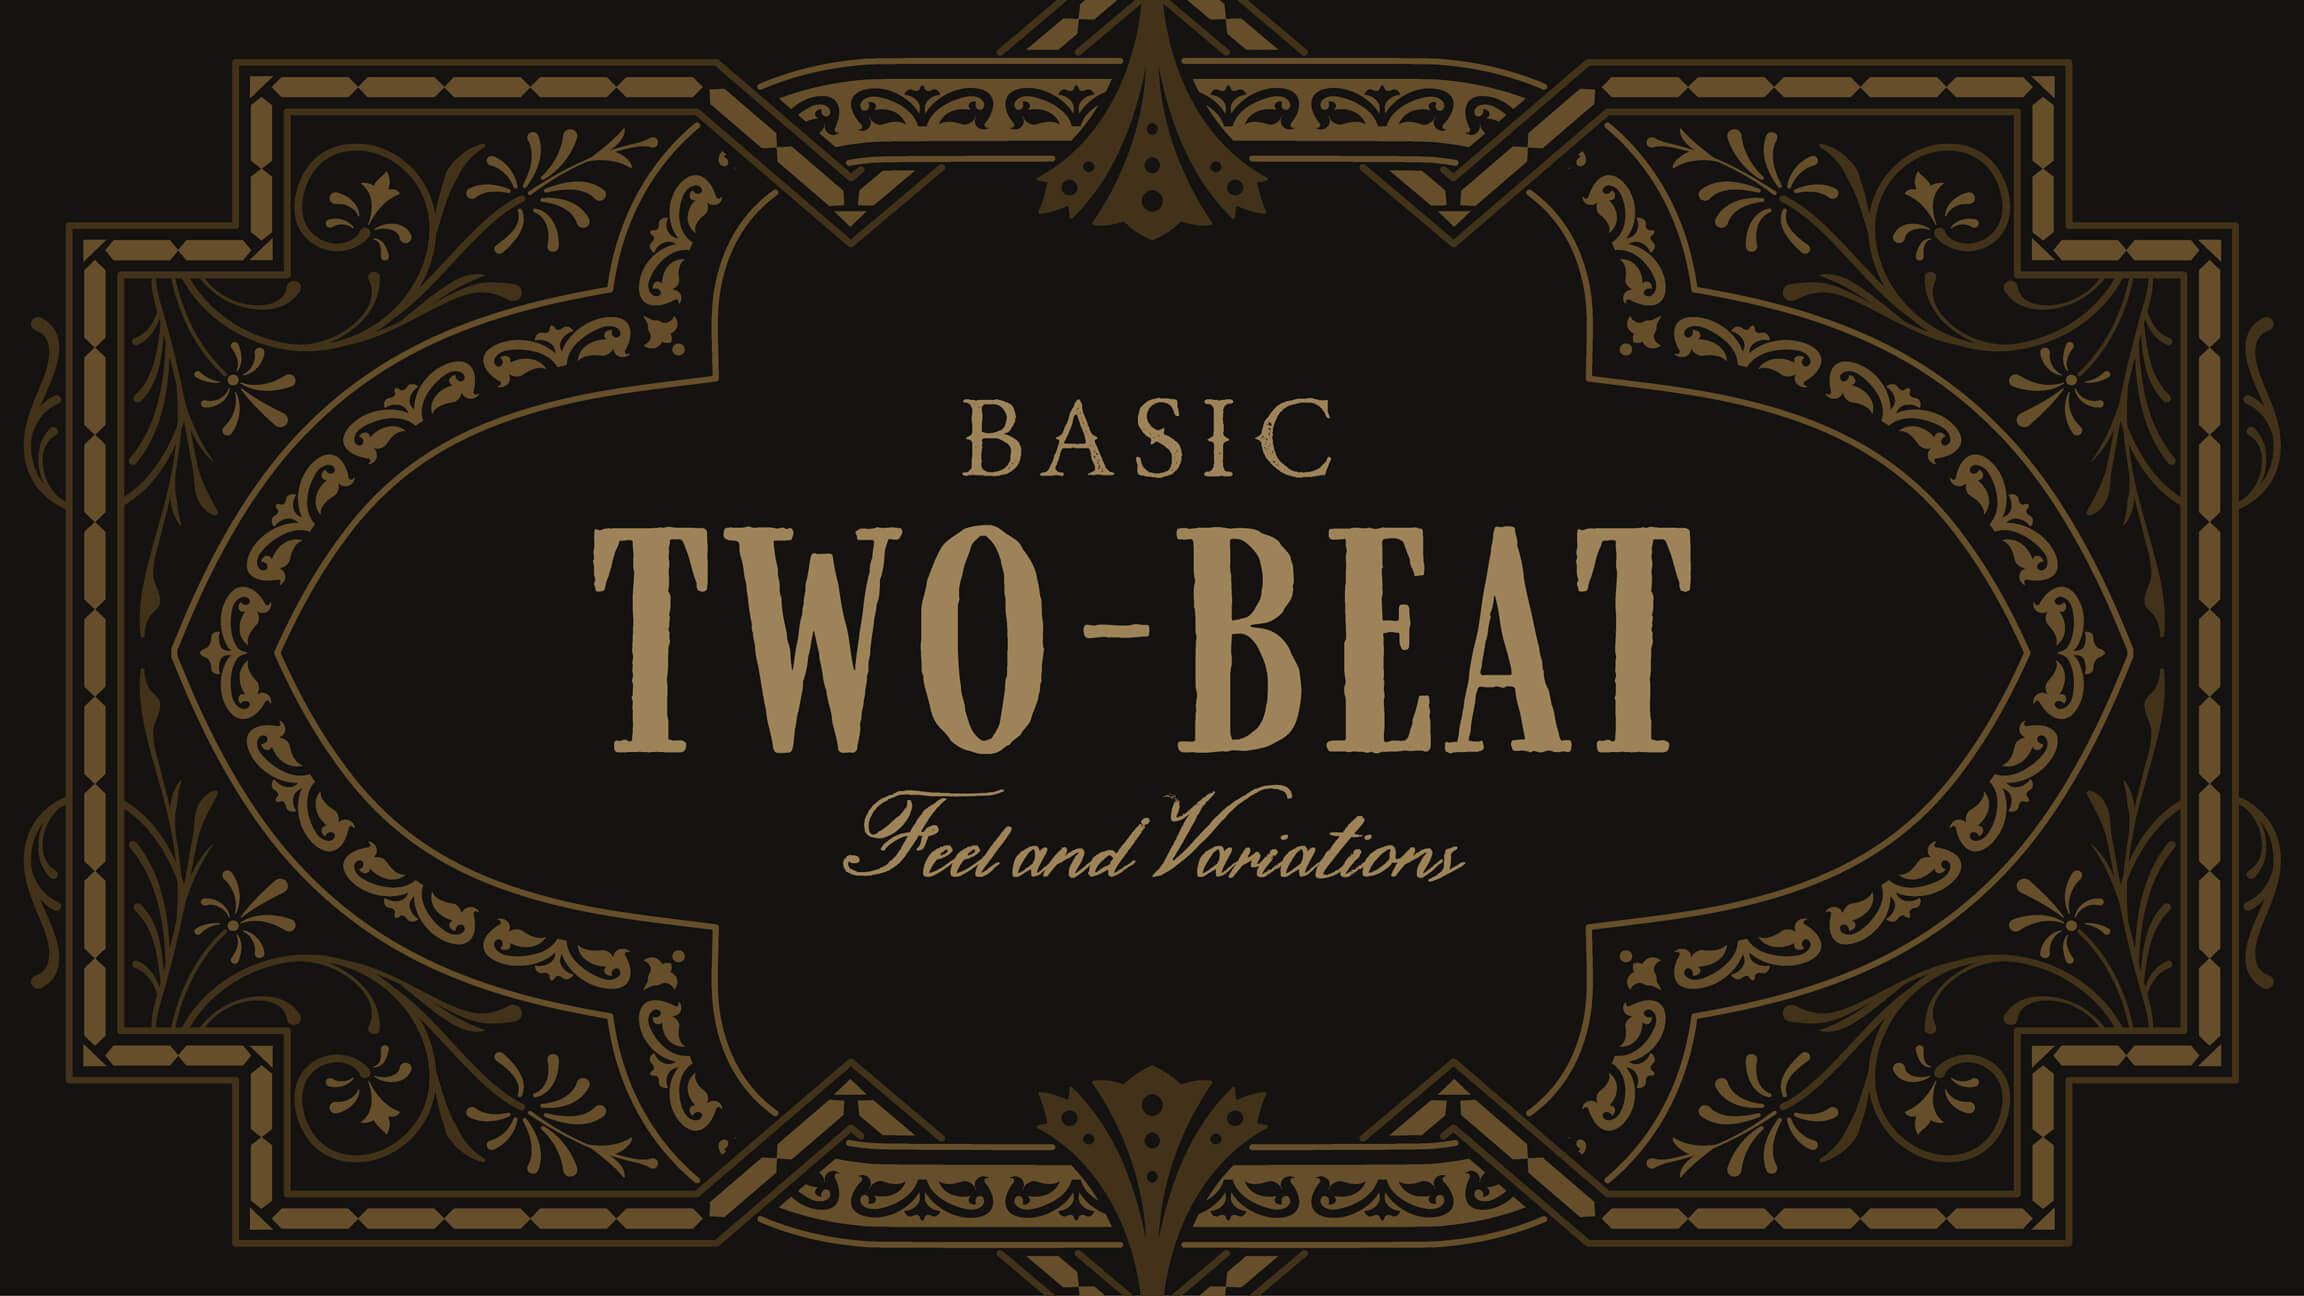 NOD lesson 1 basic two beat feel and variations thumbnail